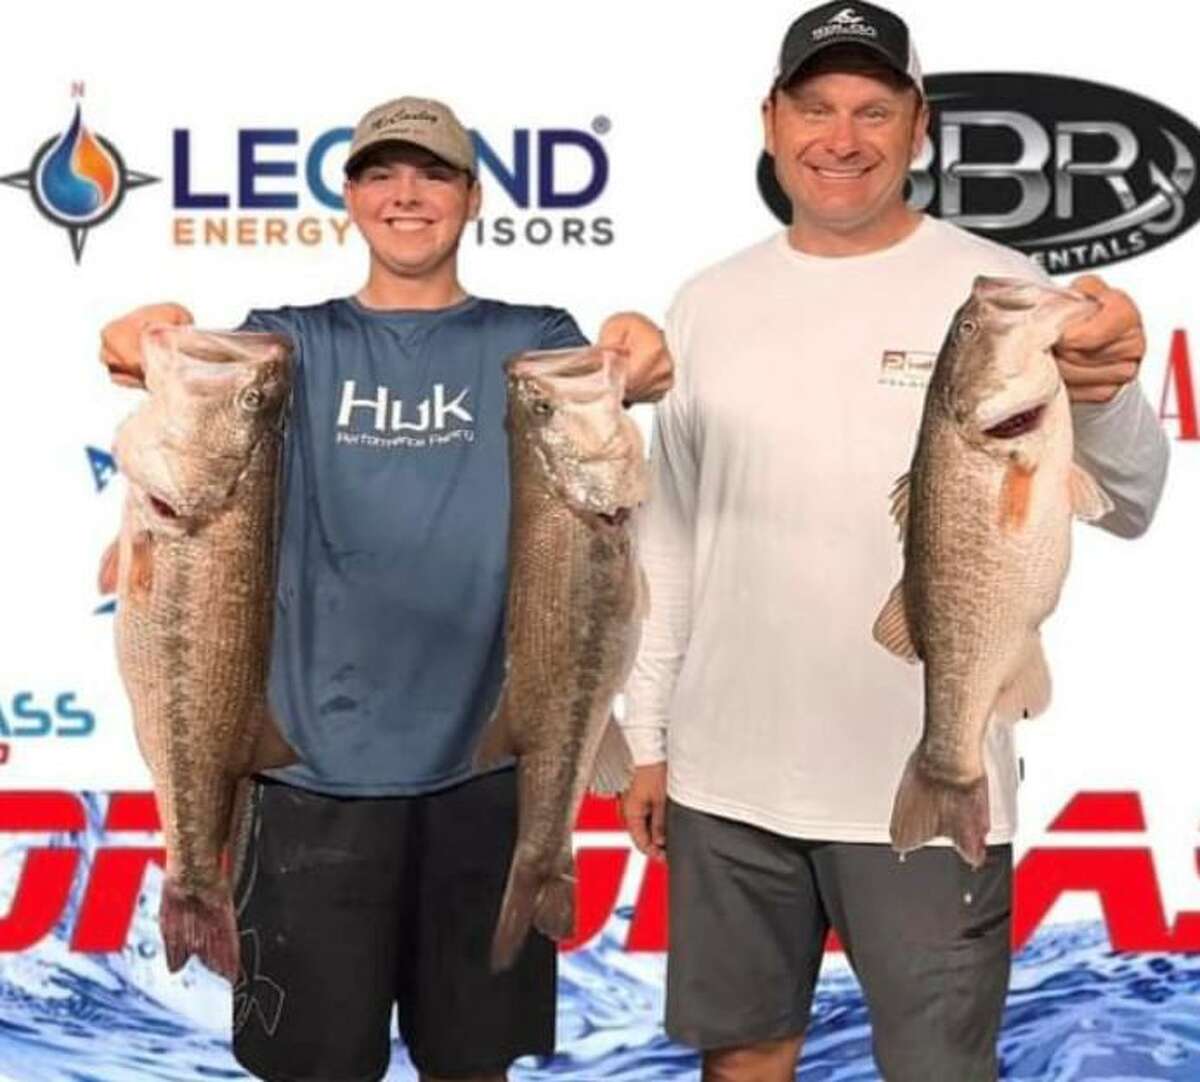 Sean Hoernke and Curtis McCauley came in first place in the CONROEBASS Tuesday Tournament with a stringer weight of 18.42 pounds. They also had 2nd place big bass weighing 7.42 pounds.